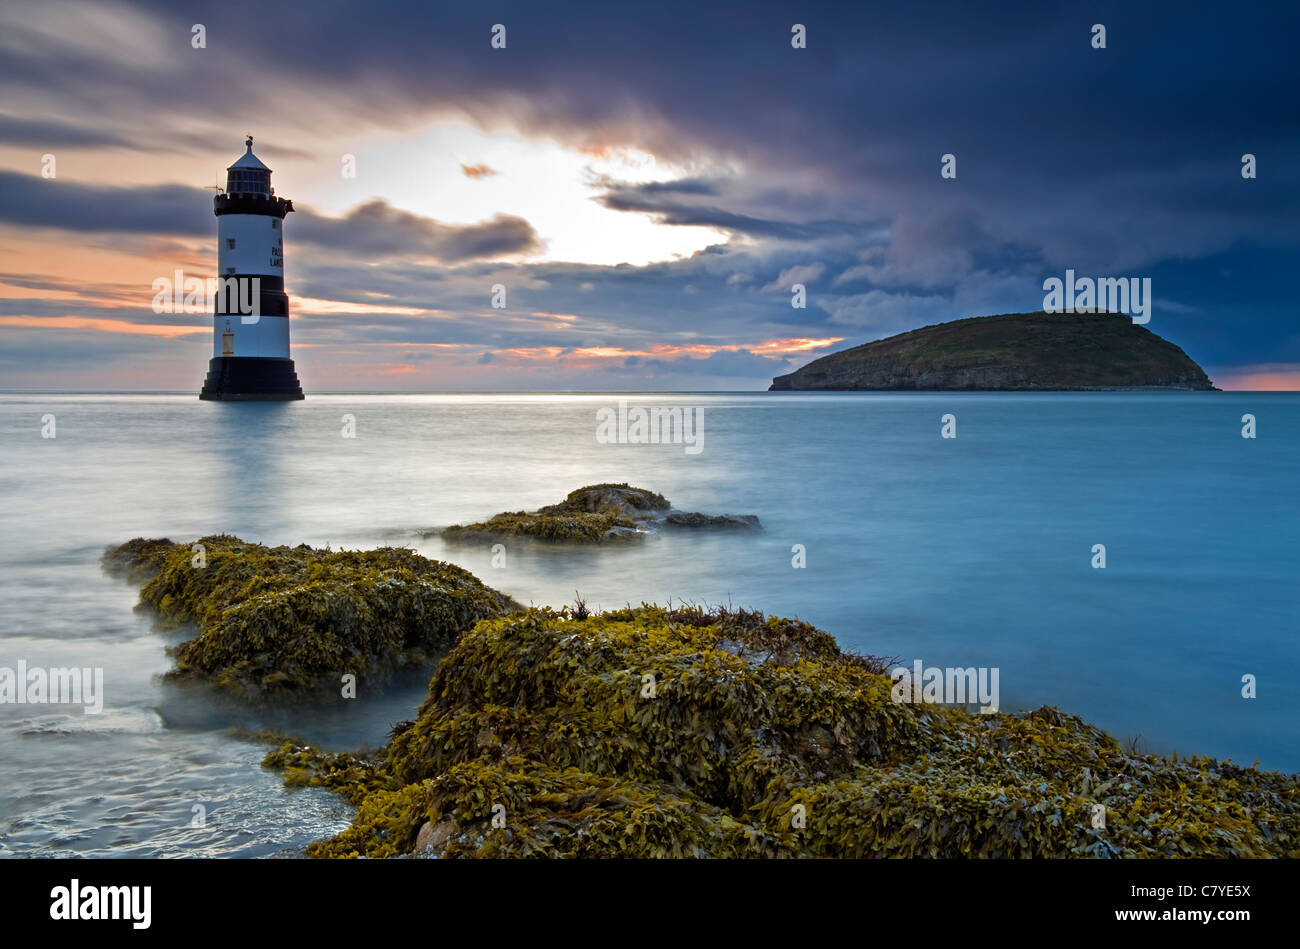 Morgendämmerung am Penmon Point Lighthouse, Penmon, Isle of Anglesey, North Wales, UK Stockfoto